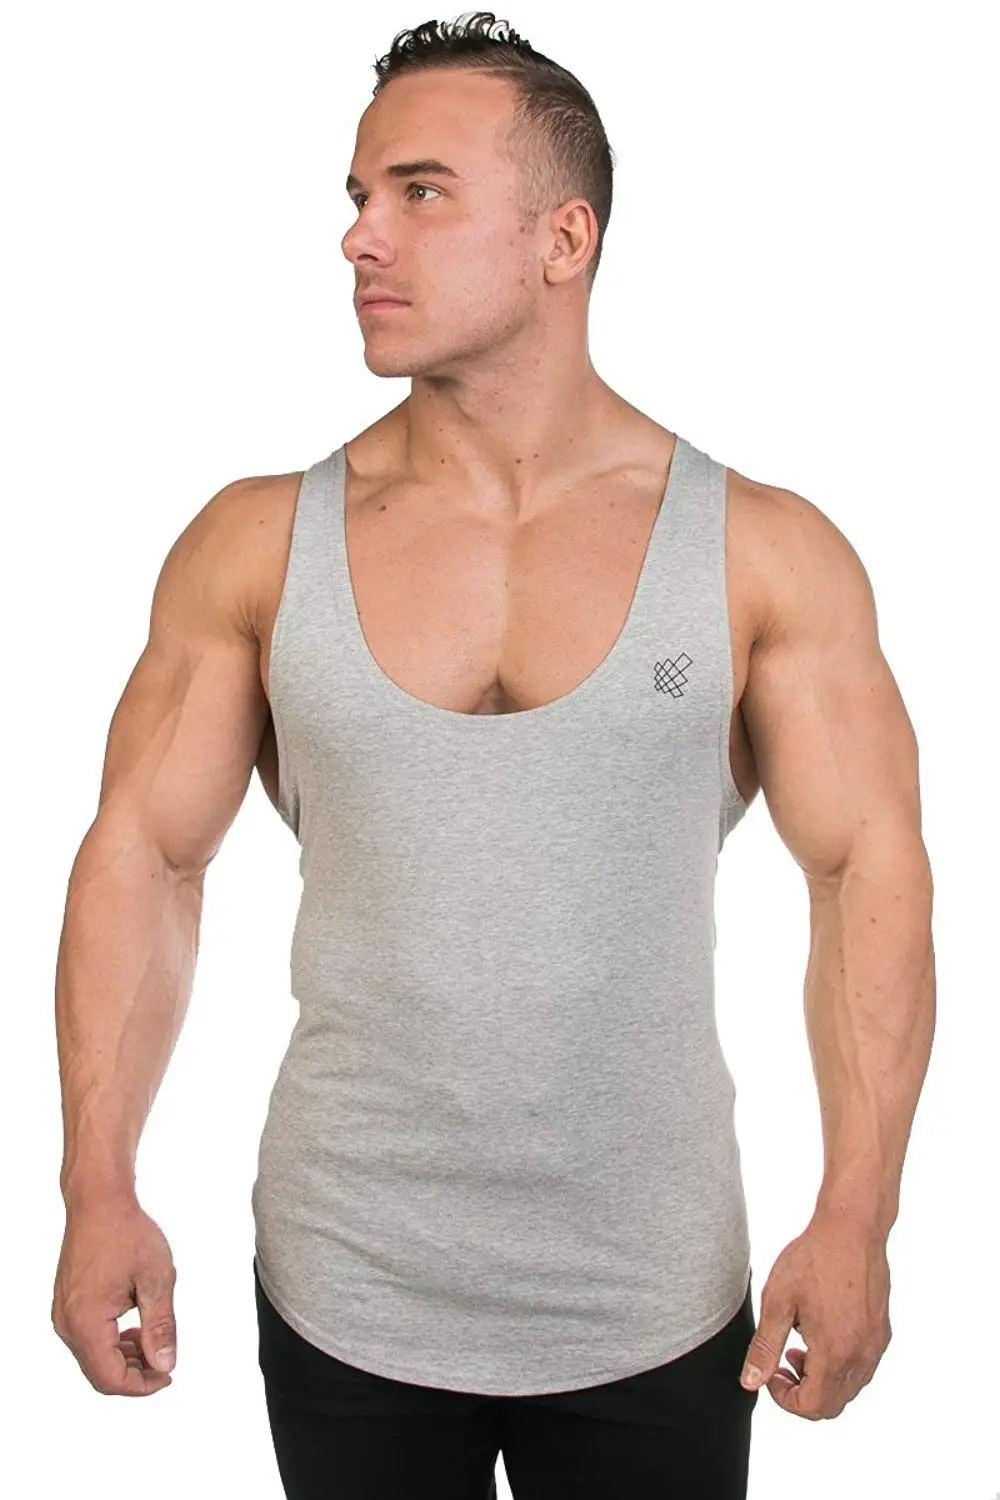 Buy Jed North Muscle Cut Stringer Workout T Shirt Muscle Tee